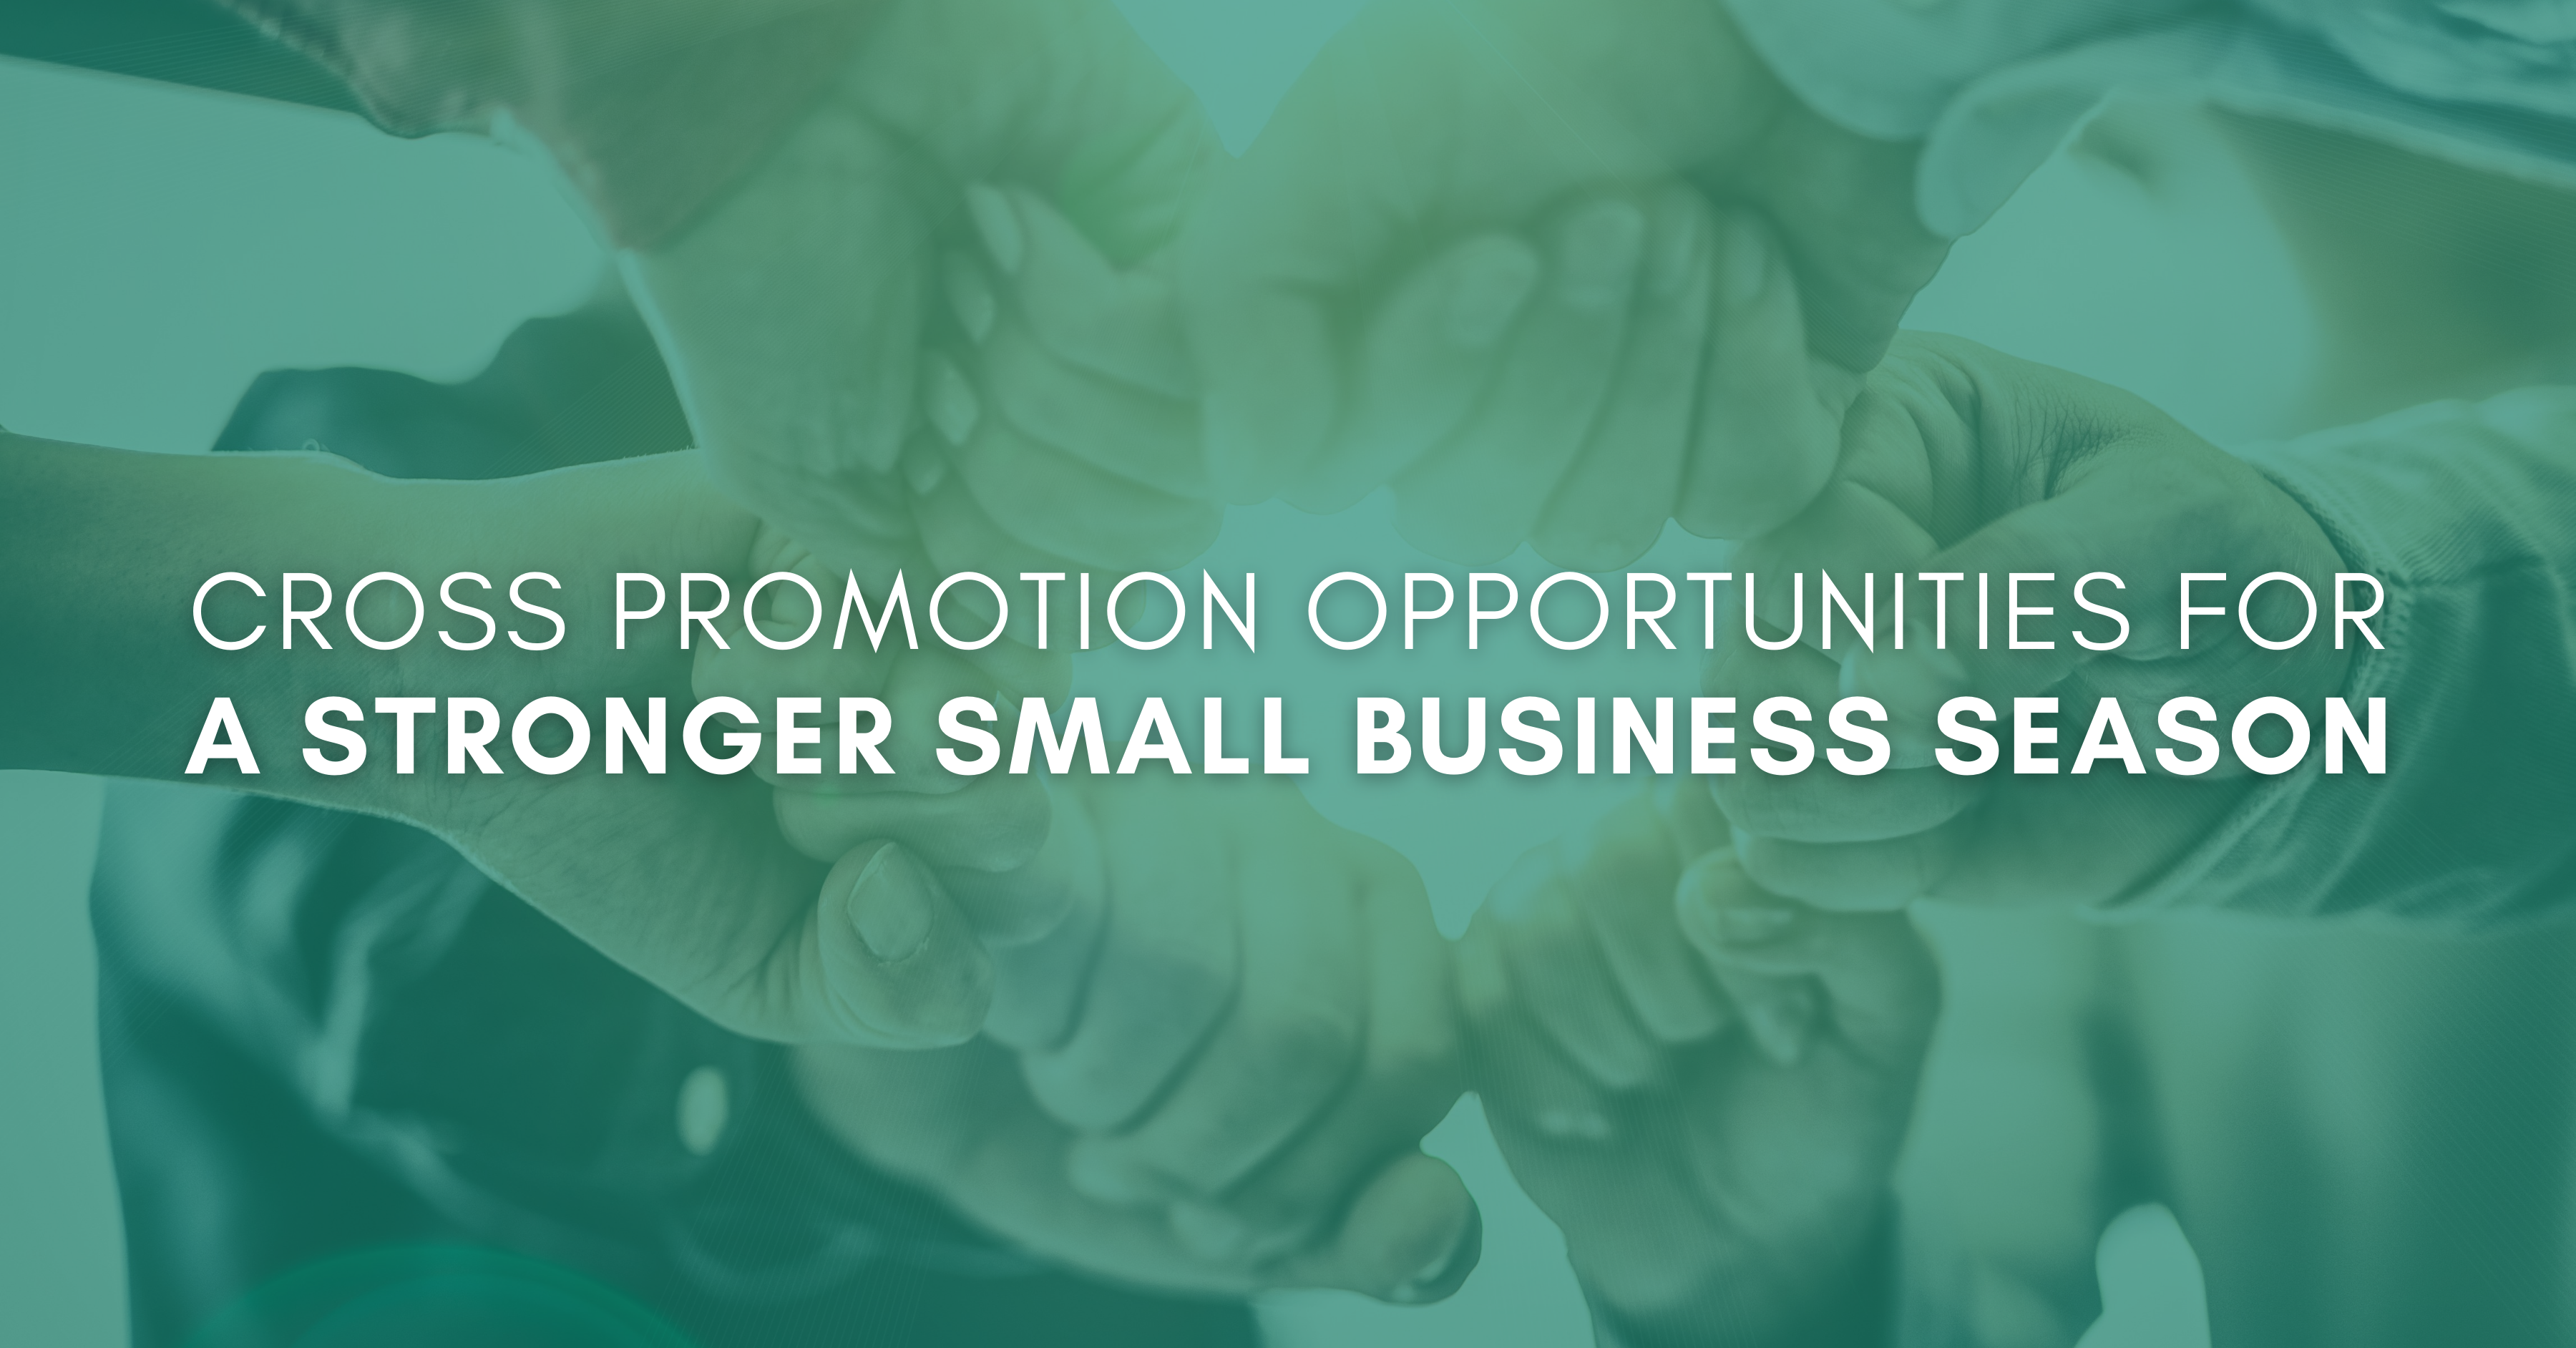 Cross Promotion Opportunities for a Stronger Small Business Season